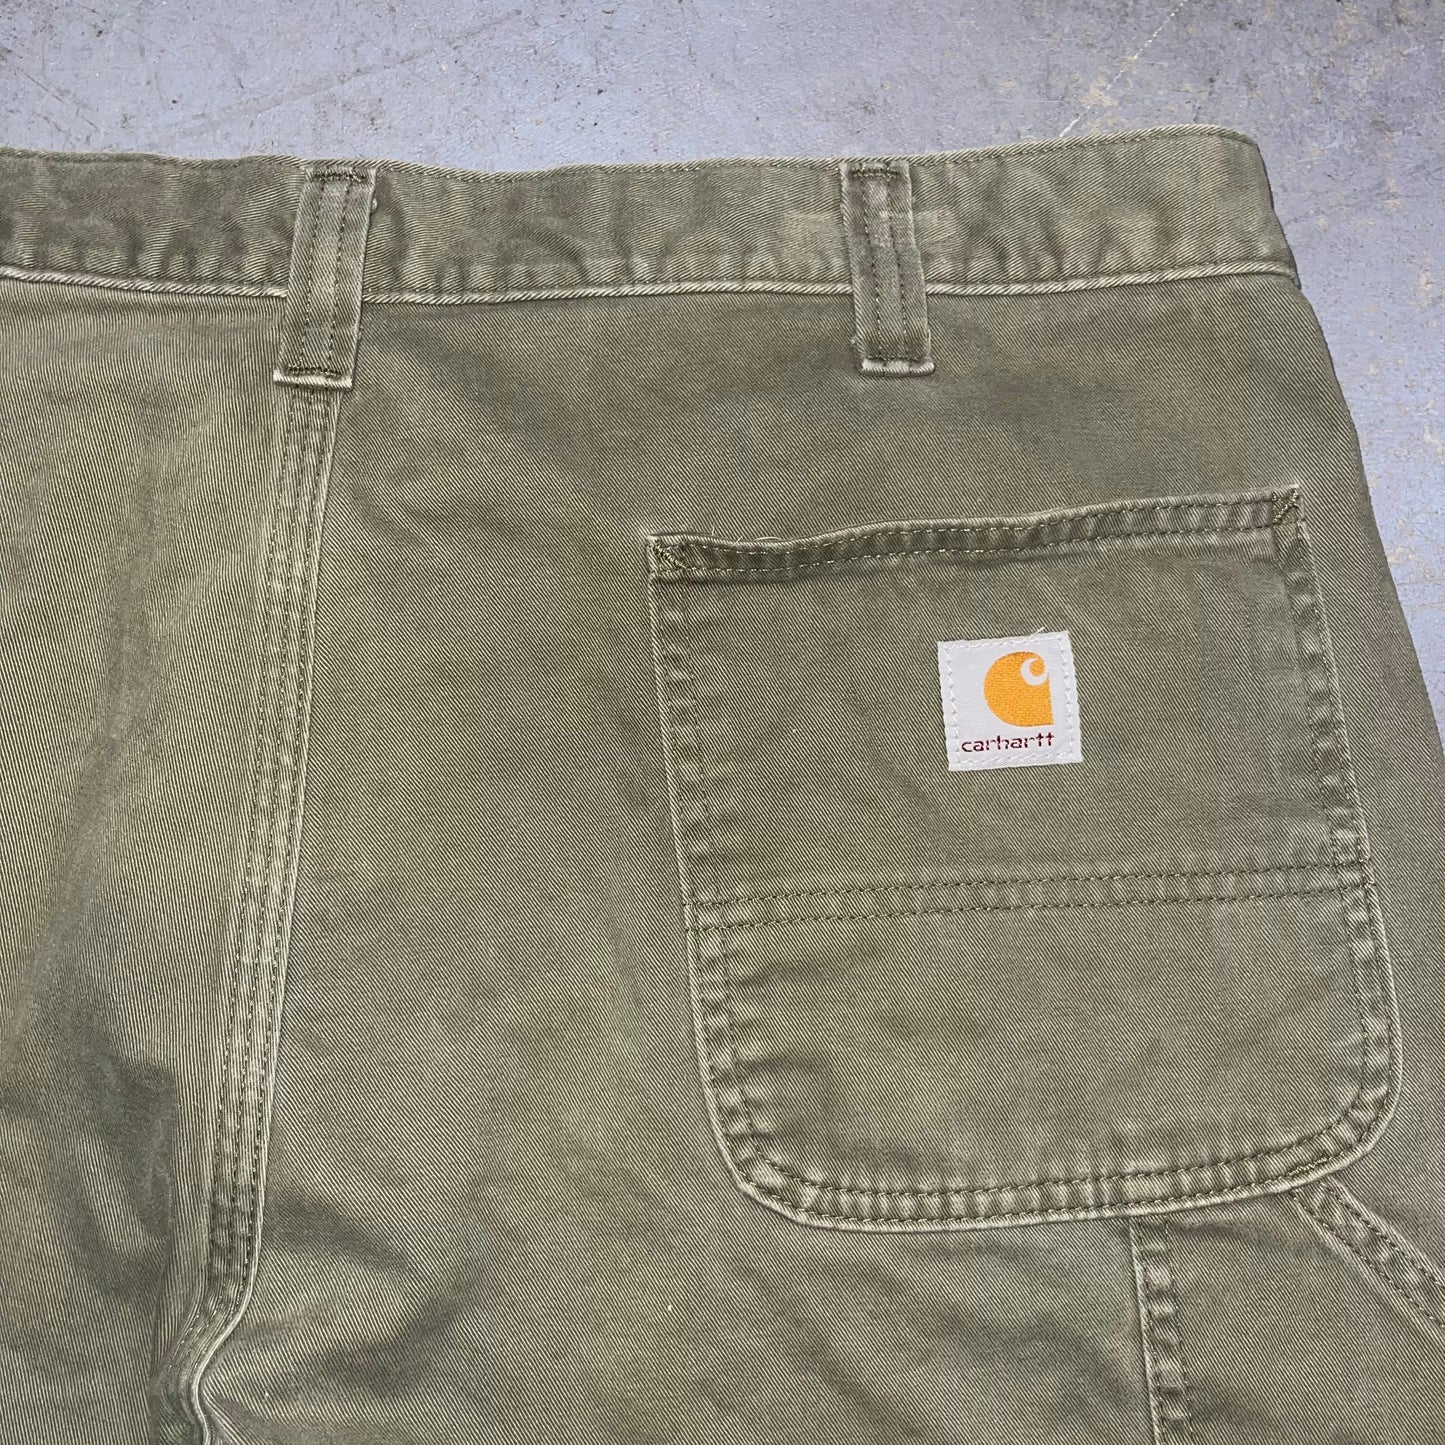 Carhartt Carpenter Relaxed Fit Workwear Shorts. Size 38